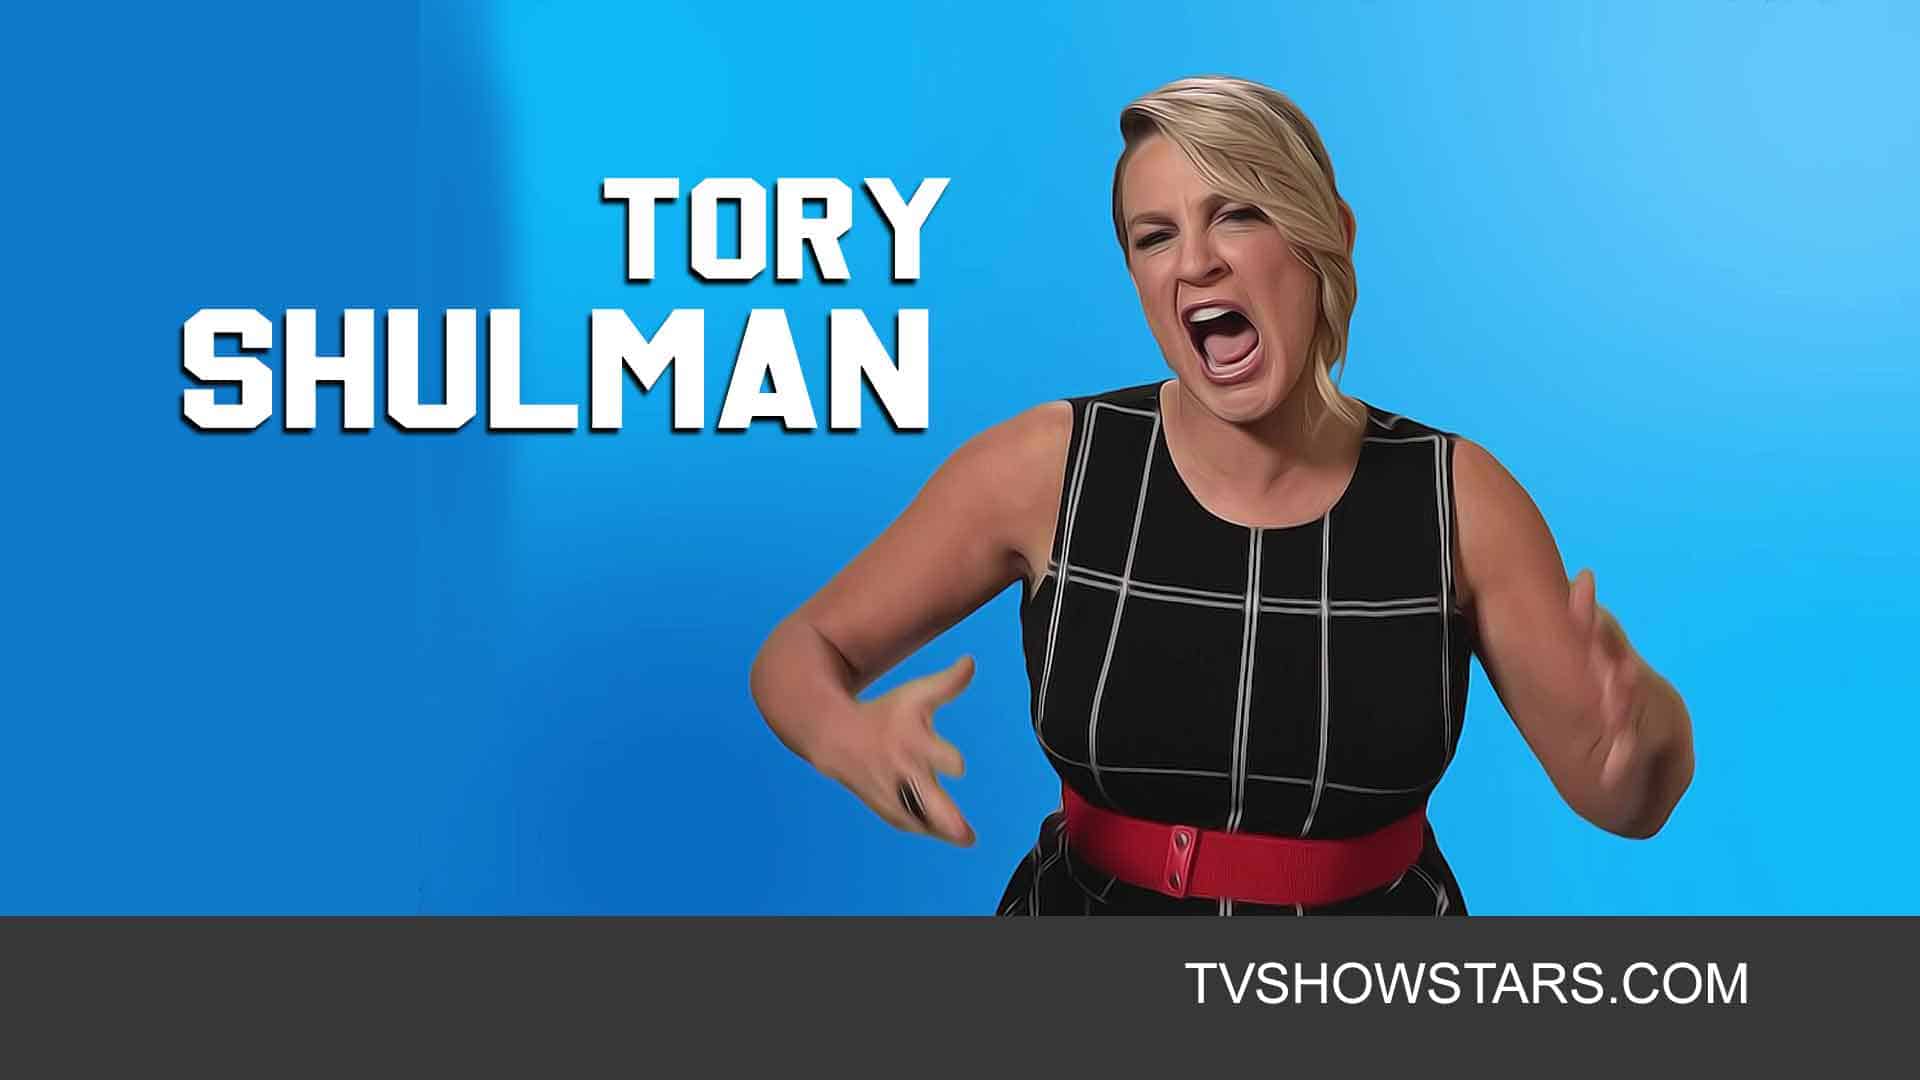 Tory Shulman, a blonde beauty is breaking the mold in American society as a...